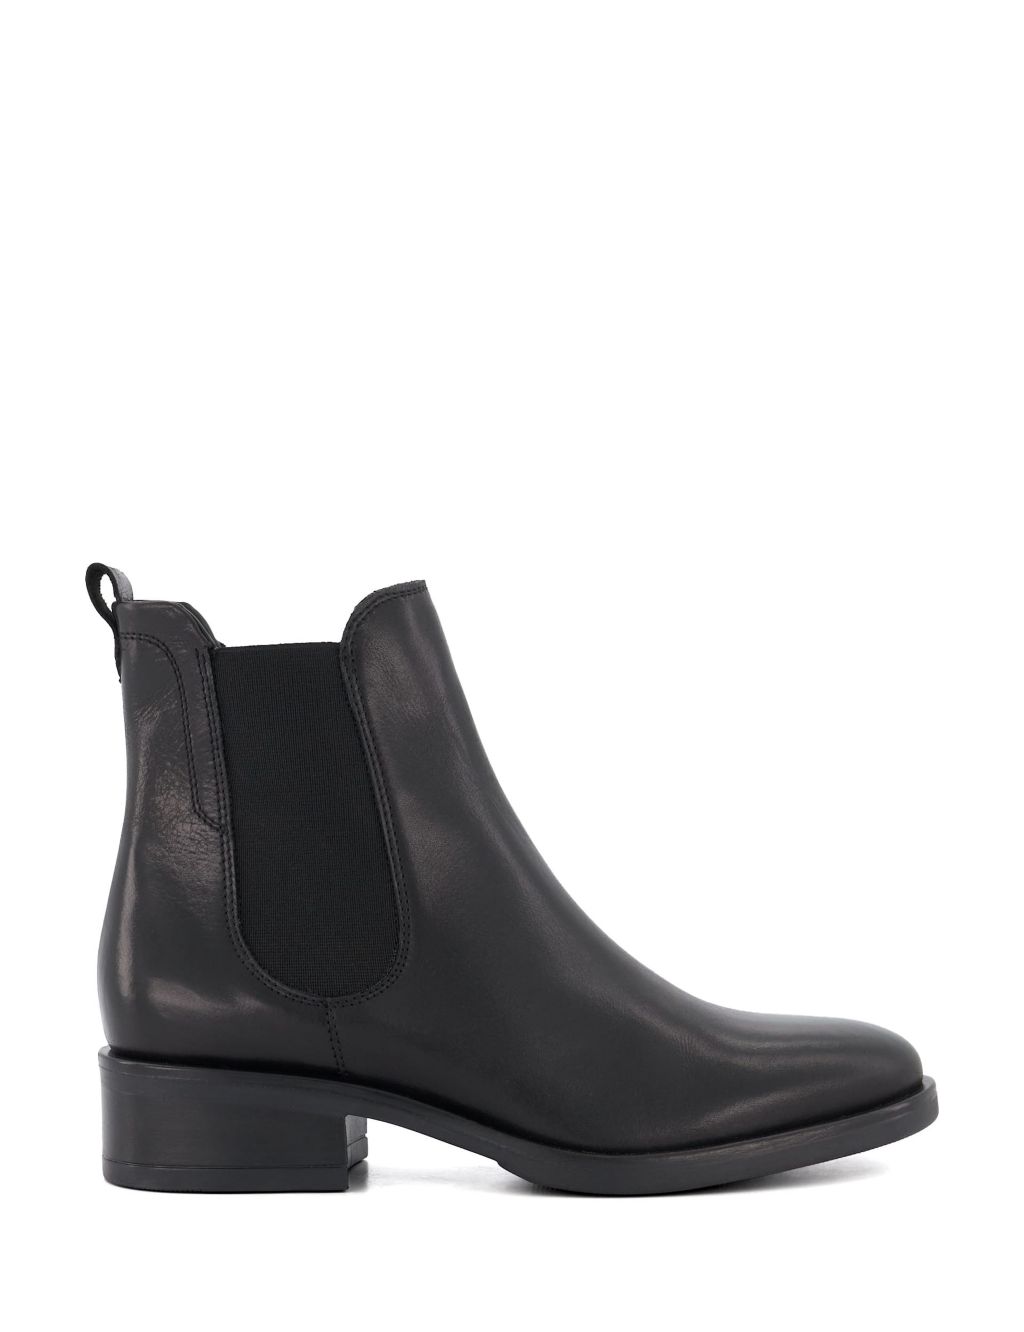 Buy Leather Chelsea Flat Ankle Boots | Dune London | M&S